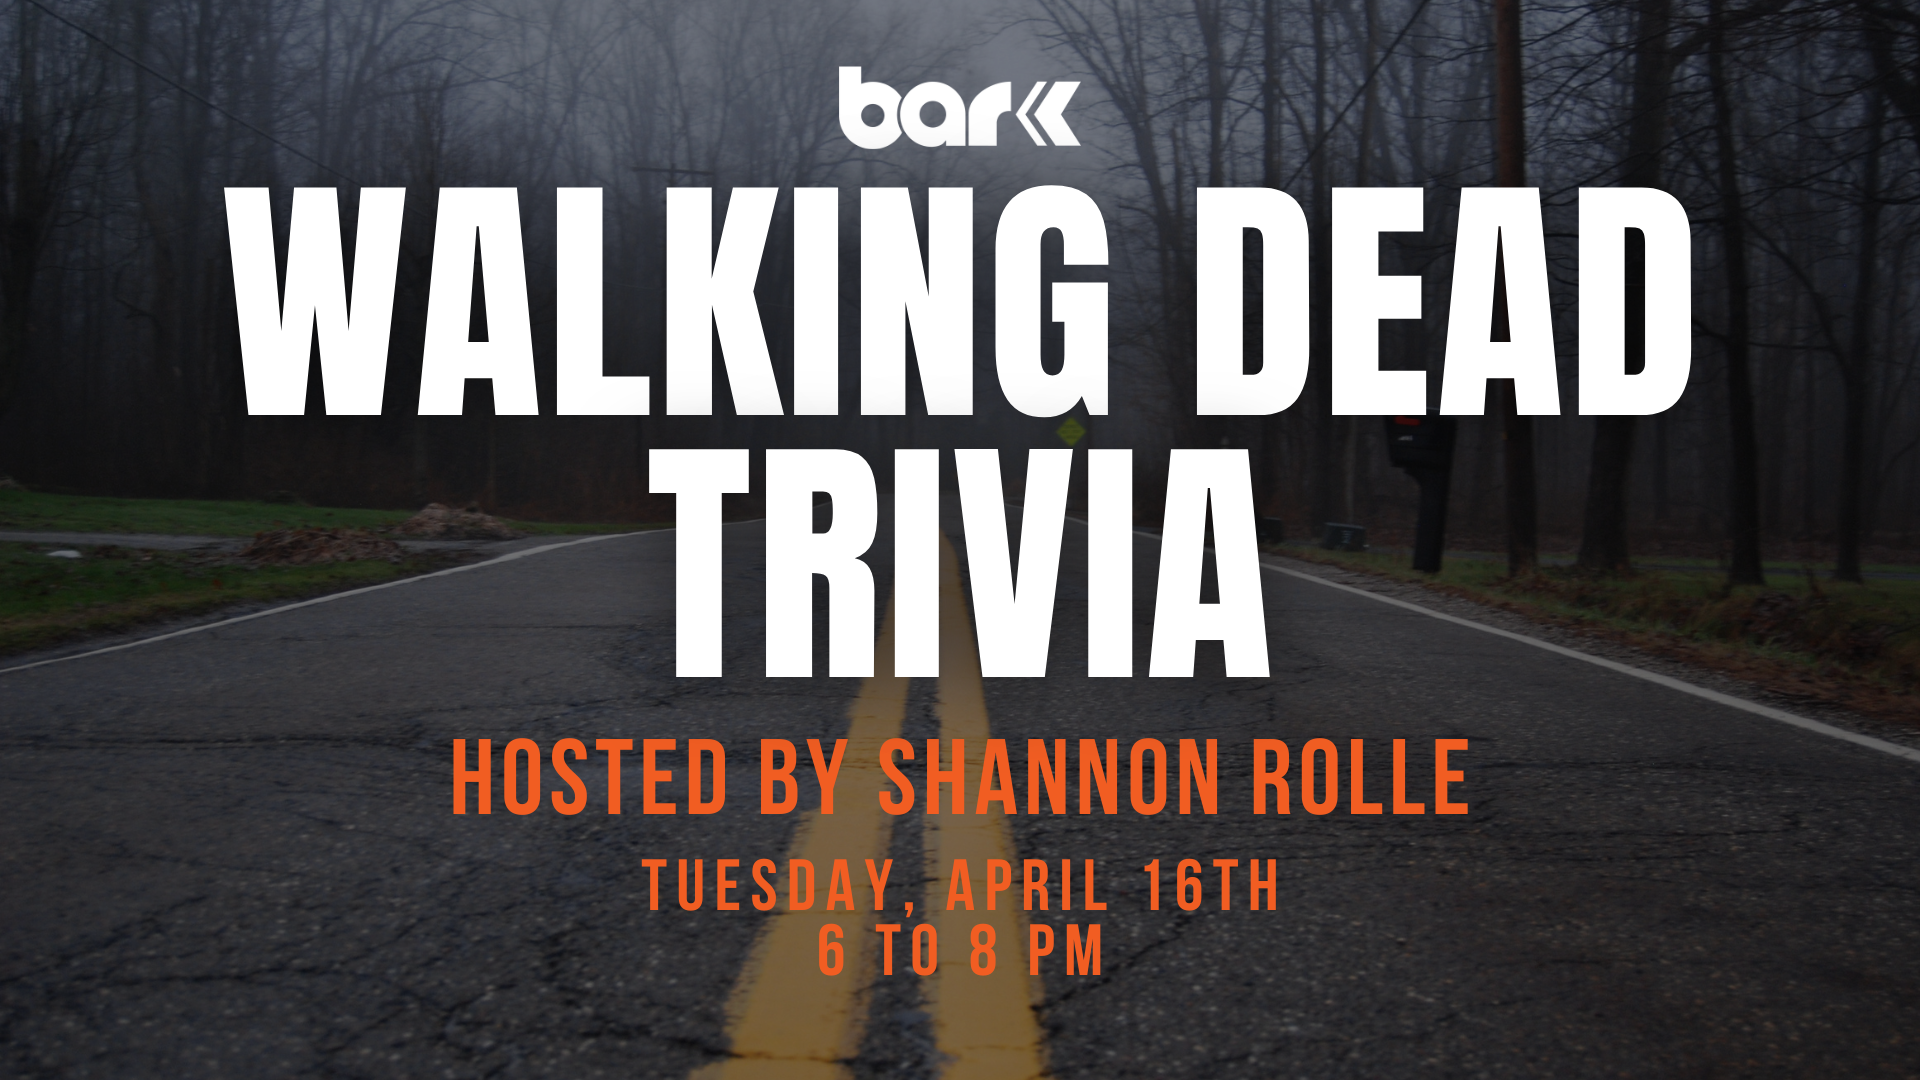 Bar K walking dead trivia hosted by shannon rolle on Tuesday, April 16th from 6 to 8 pm.